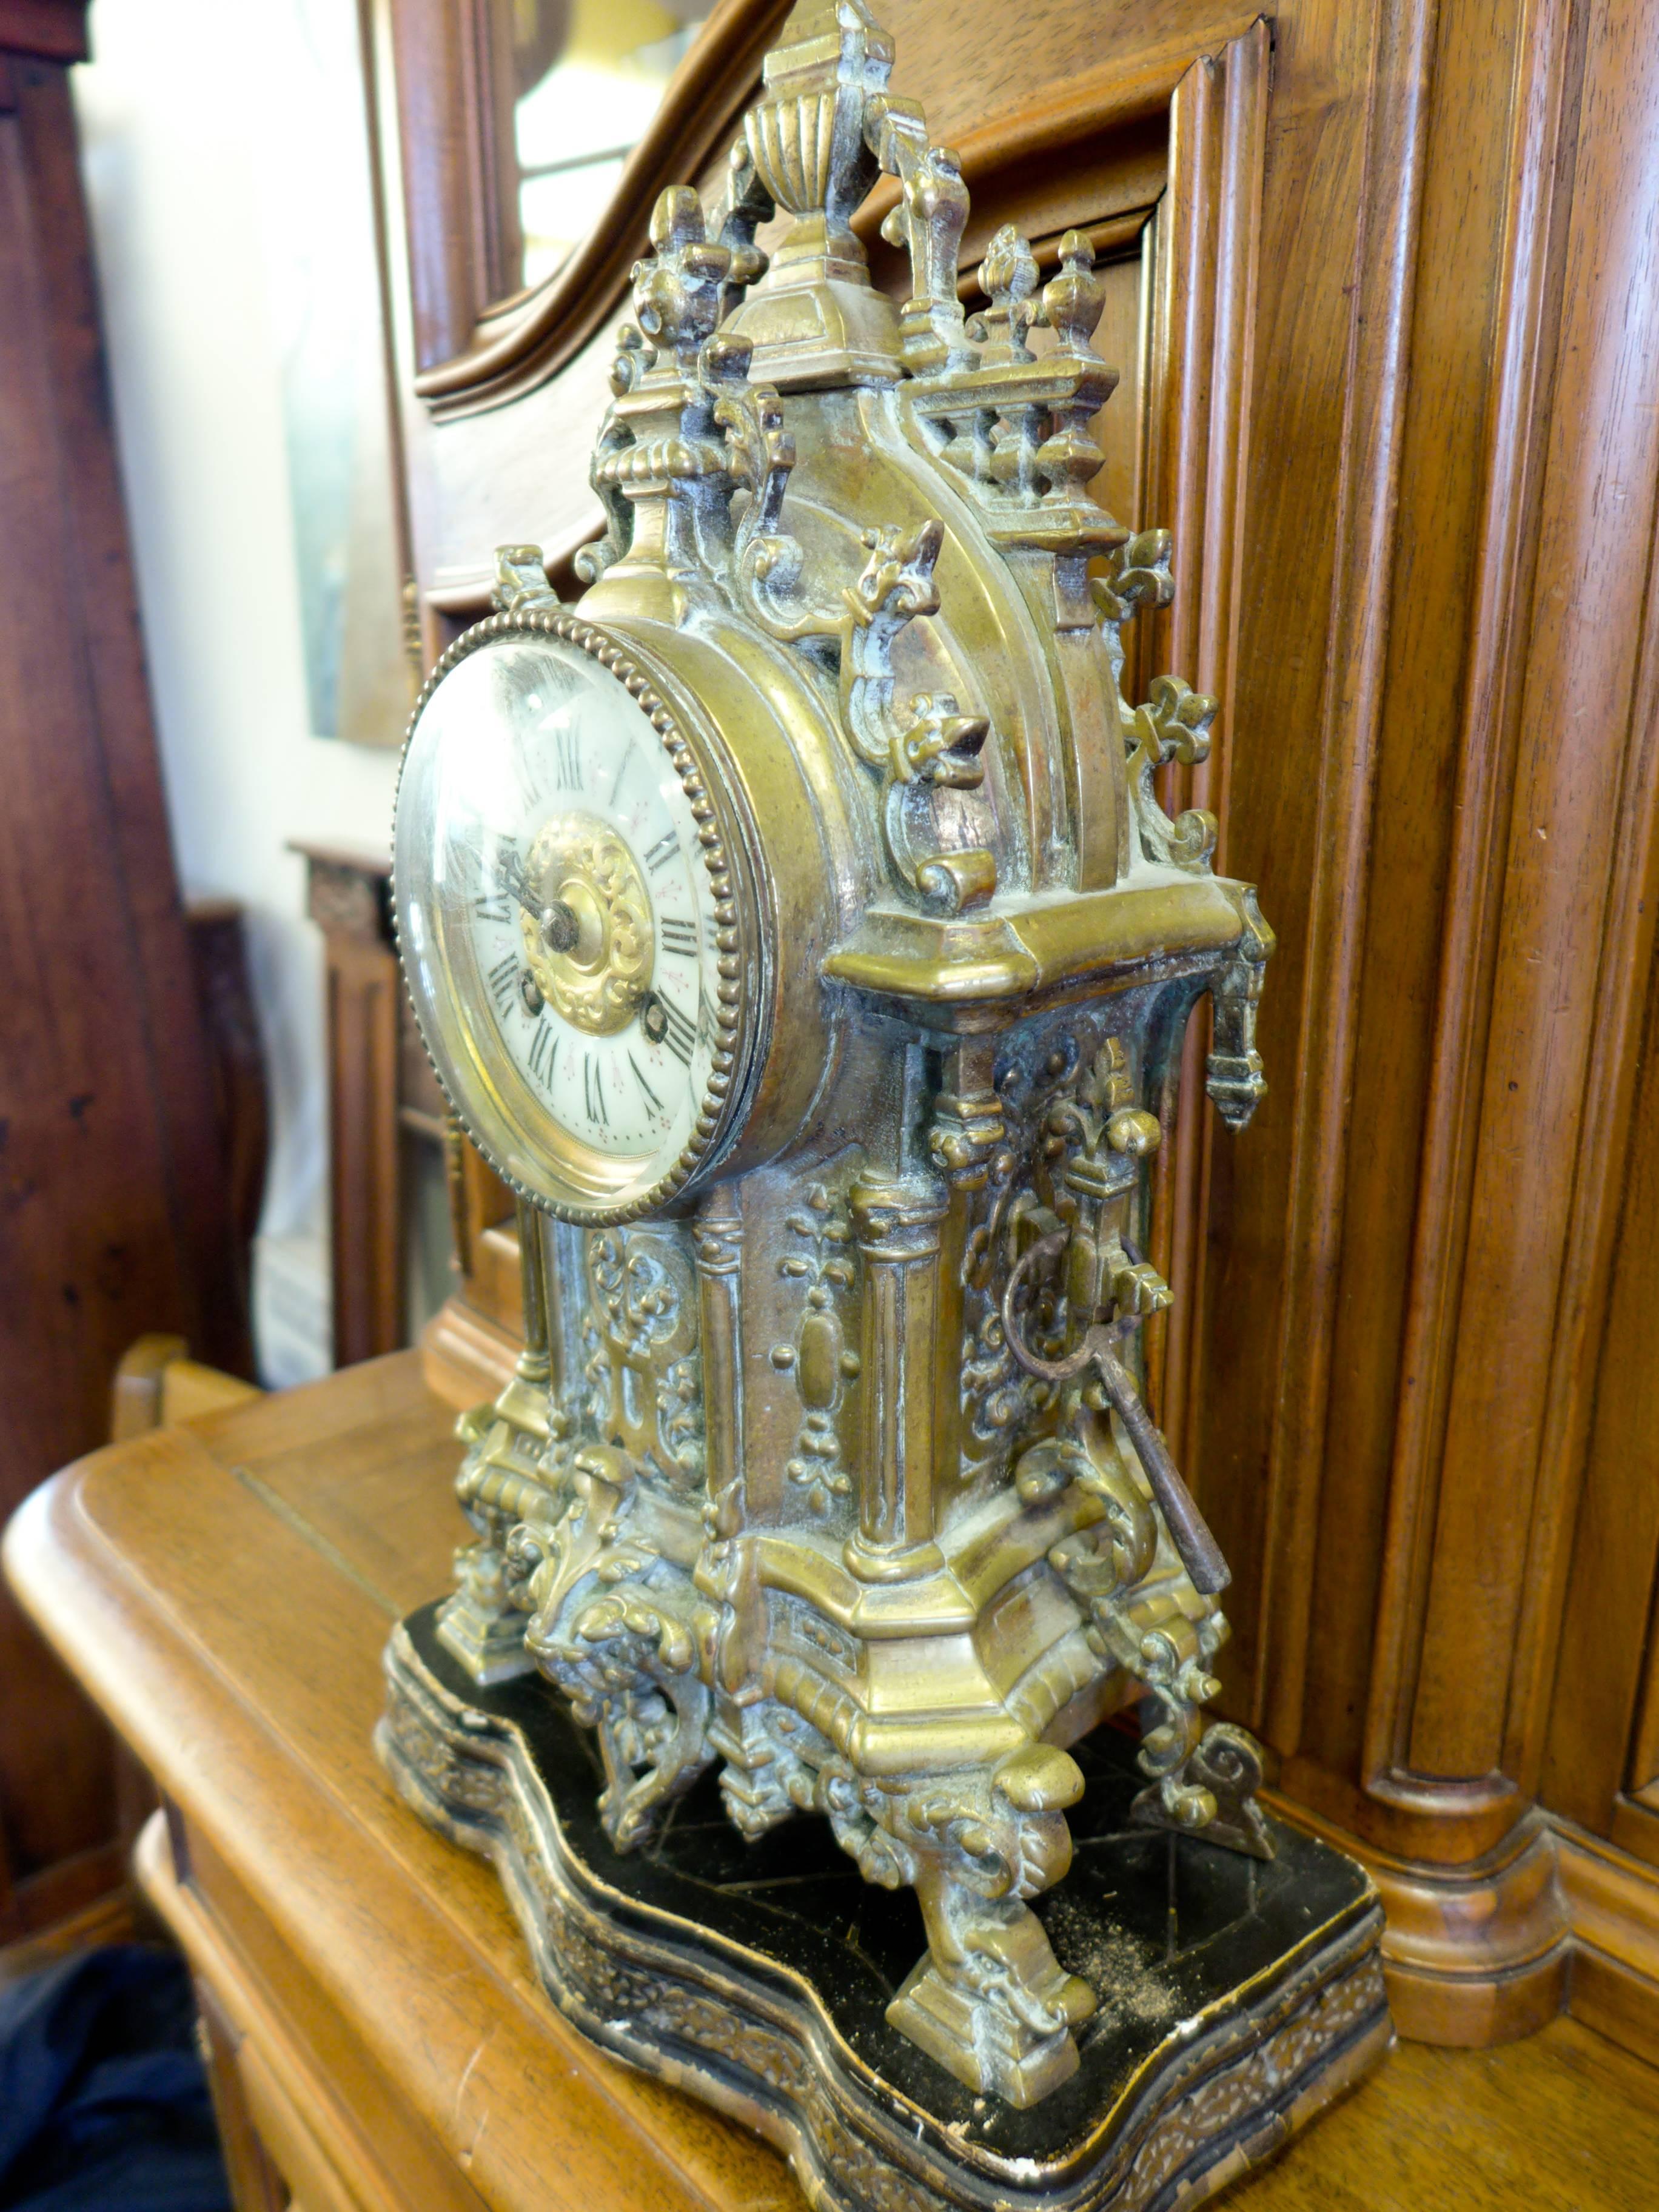 Great 19th century, impressive French, bronze mantel clock in Gothic style. Beautifully ornated It rests on its four feet over a nice wood stand.
The white enamelled dial has Roman numerals.
This clock will make a statement wherever it is